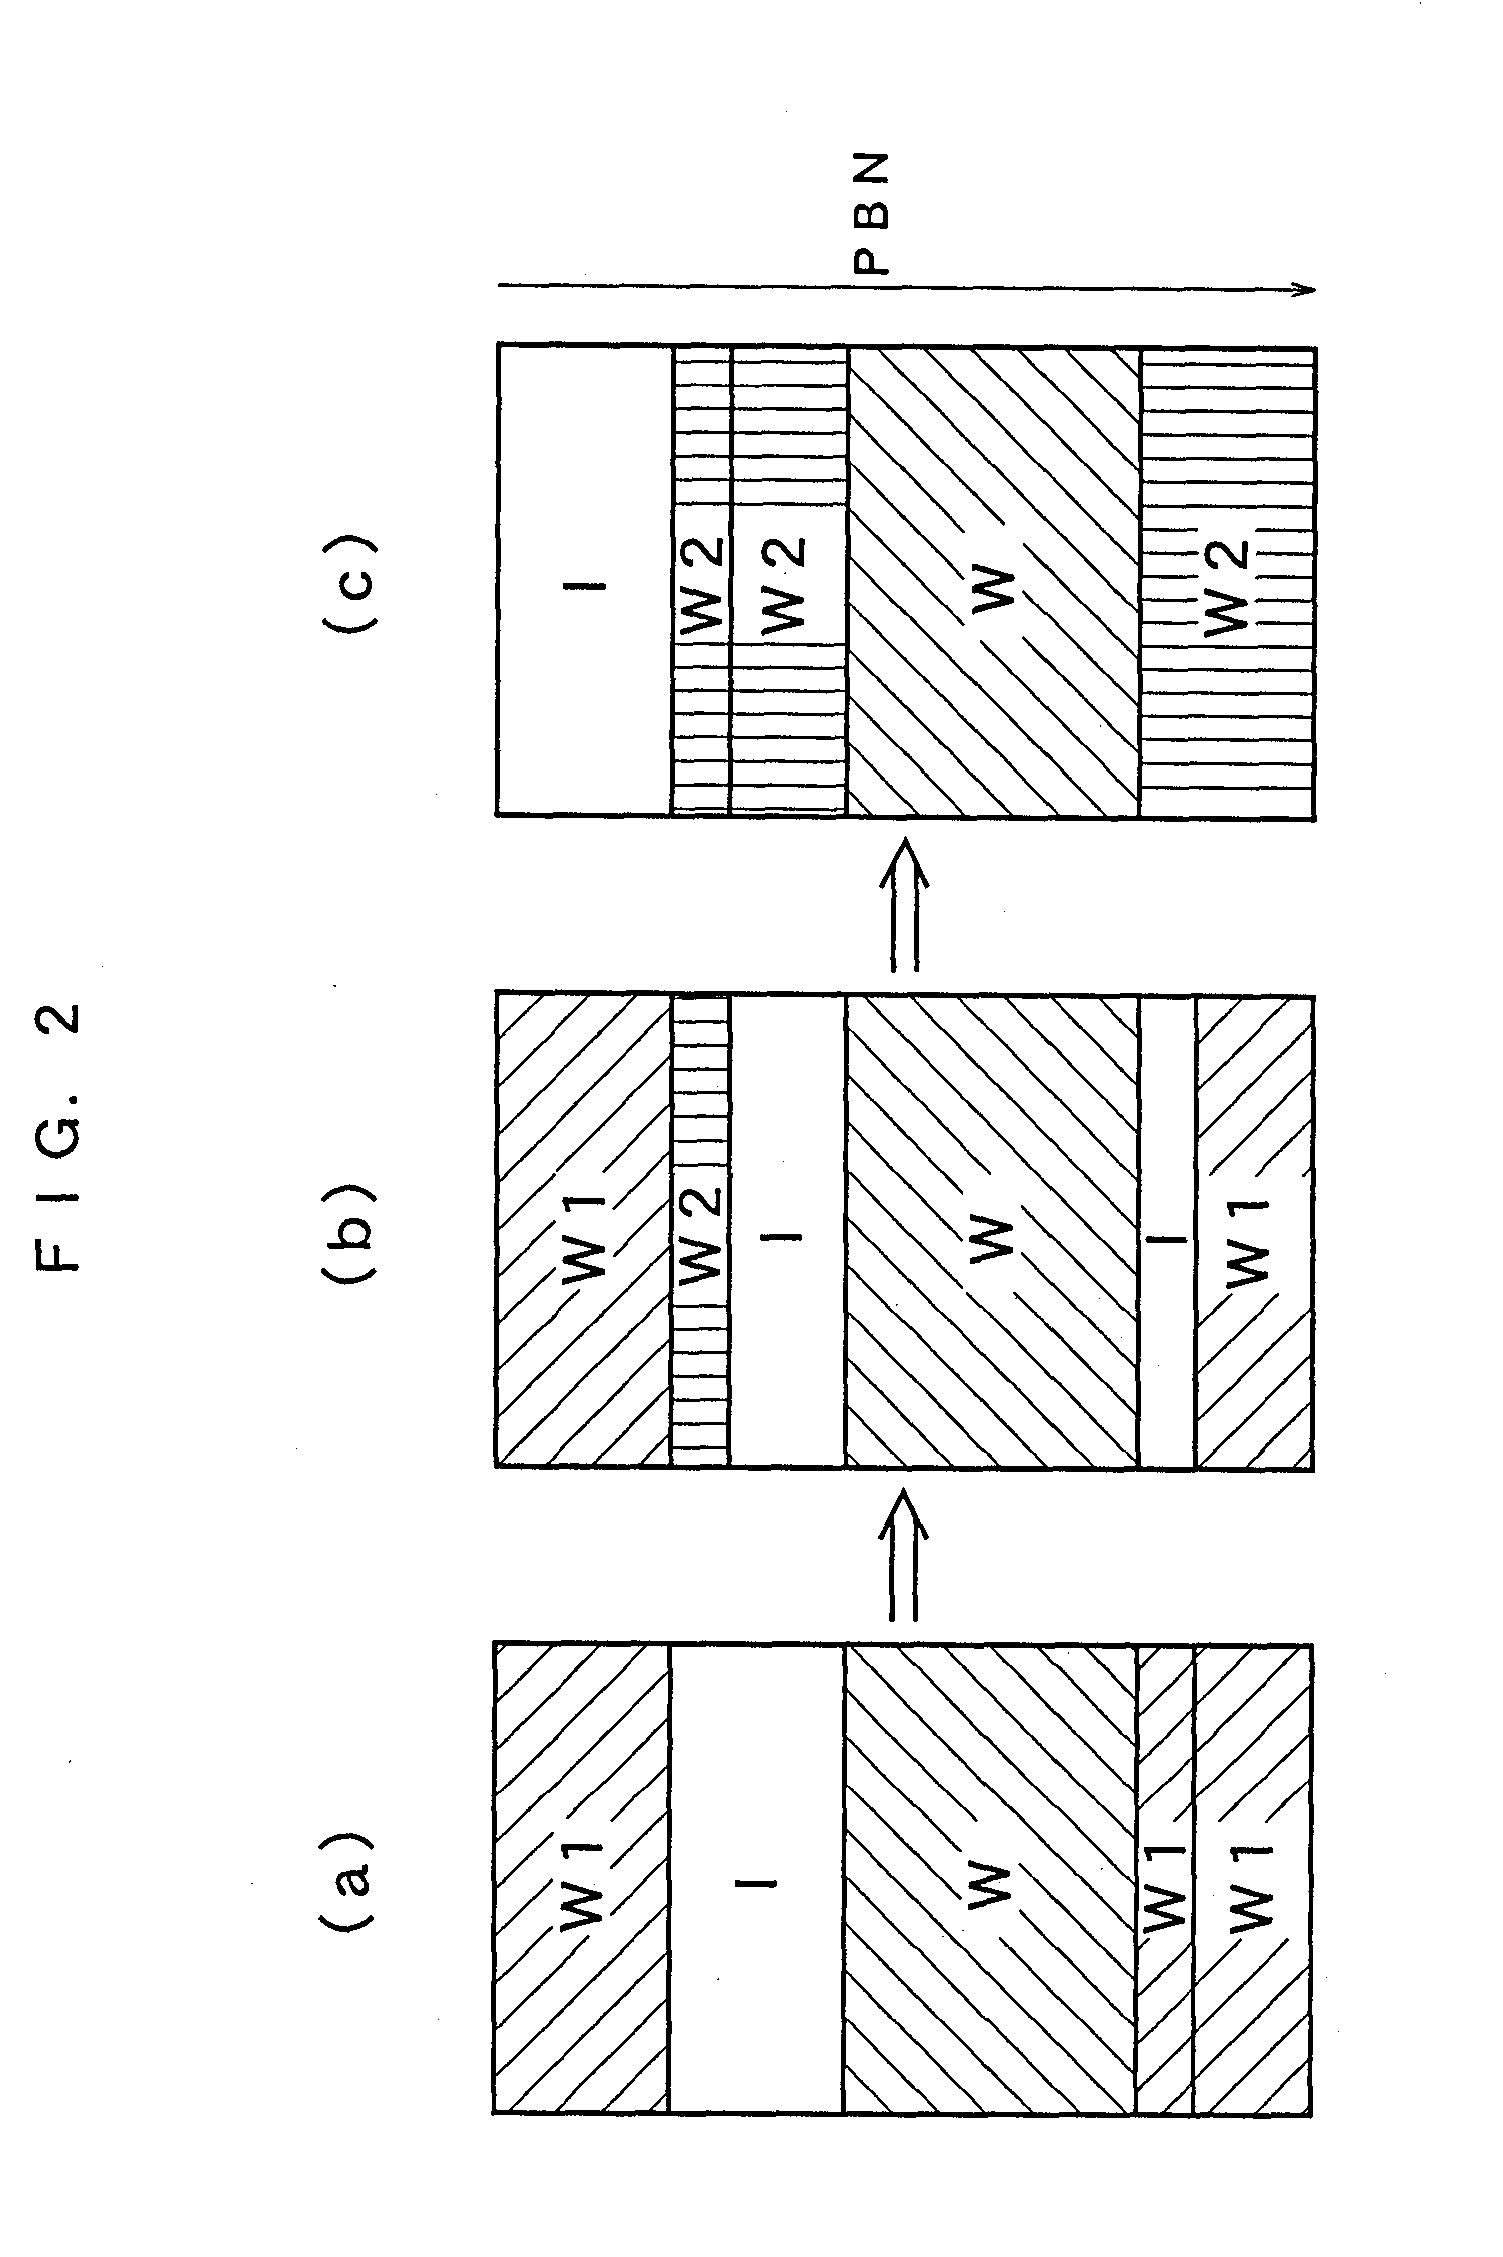 Semiconductor recording apparatus and semiconductor recording system